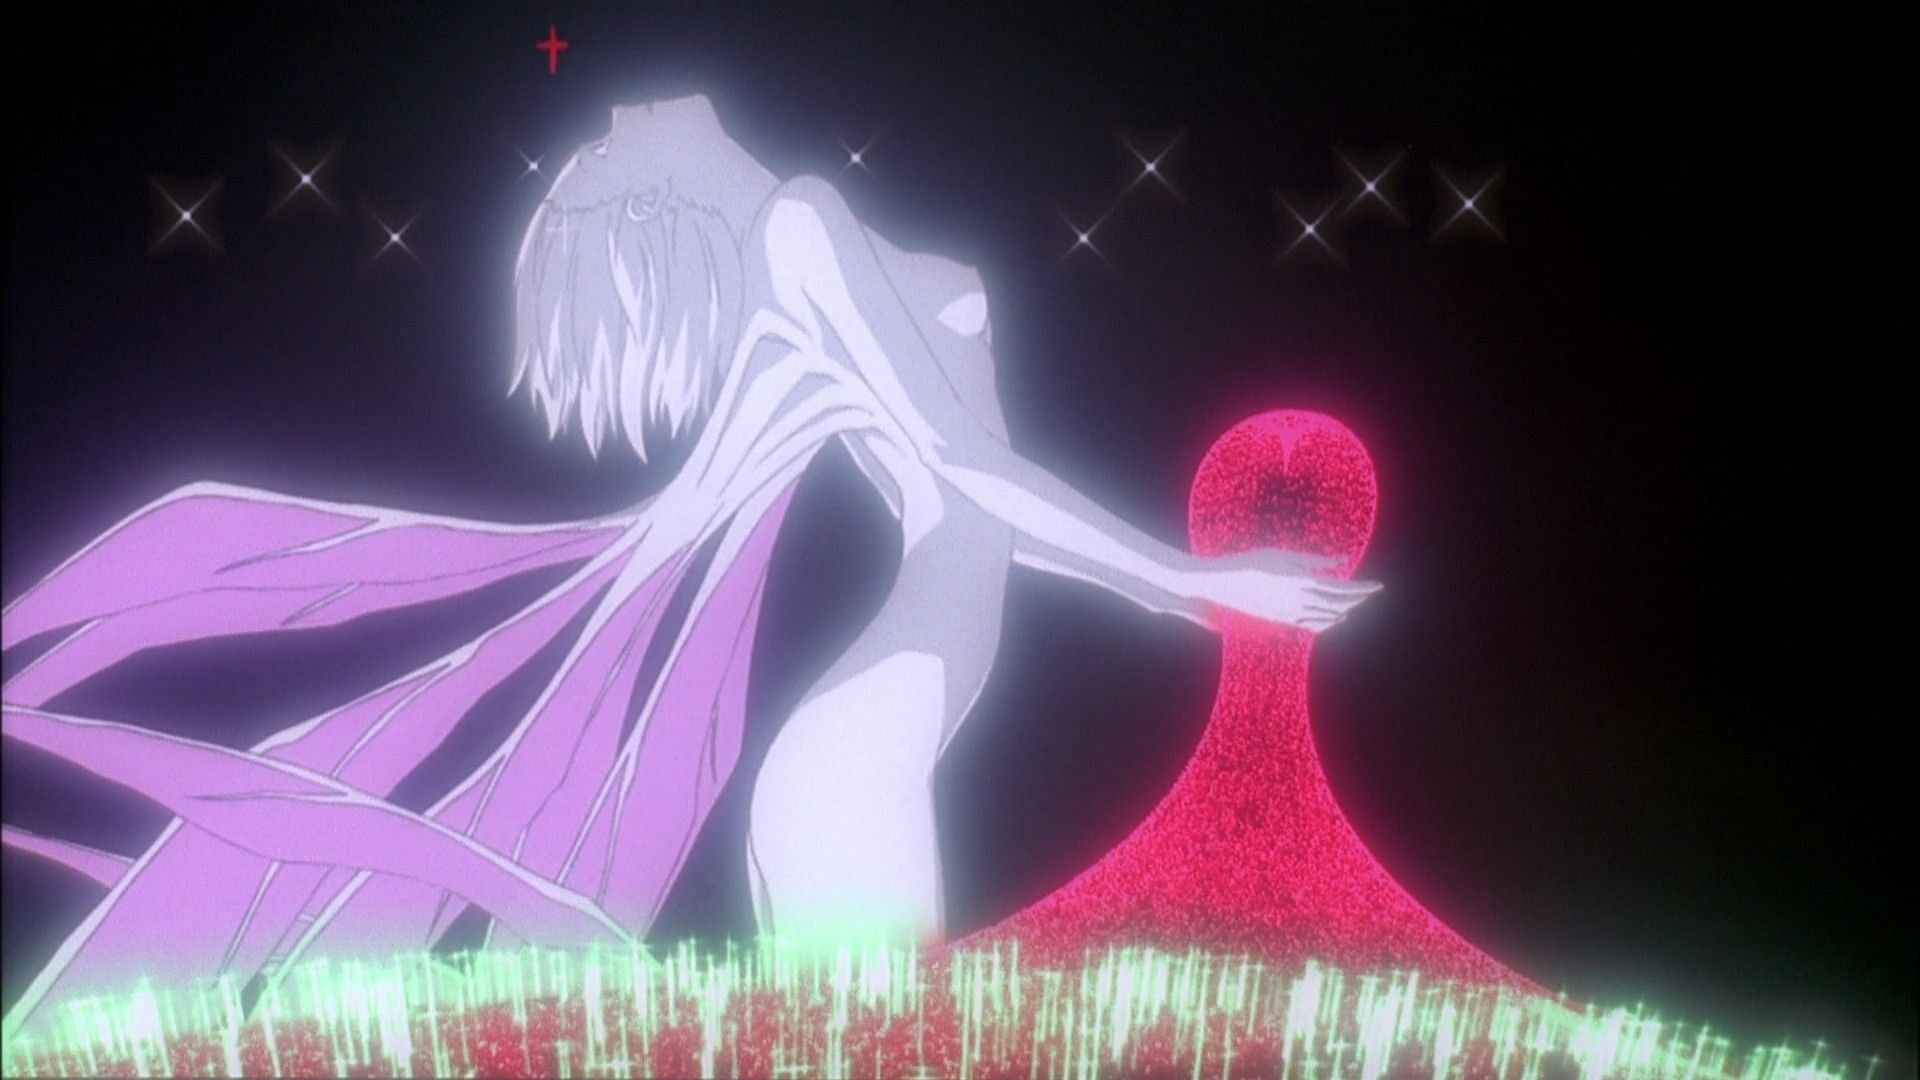 Rei/Lilith from Evangelion (Image via Gainax)